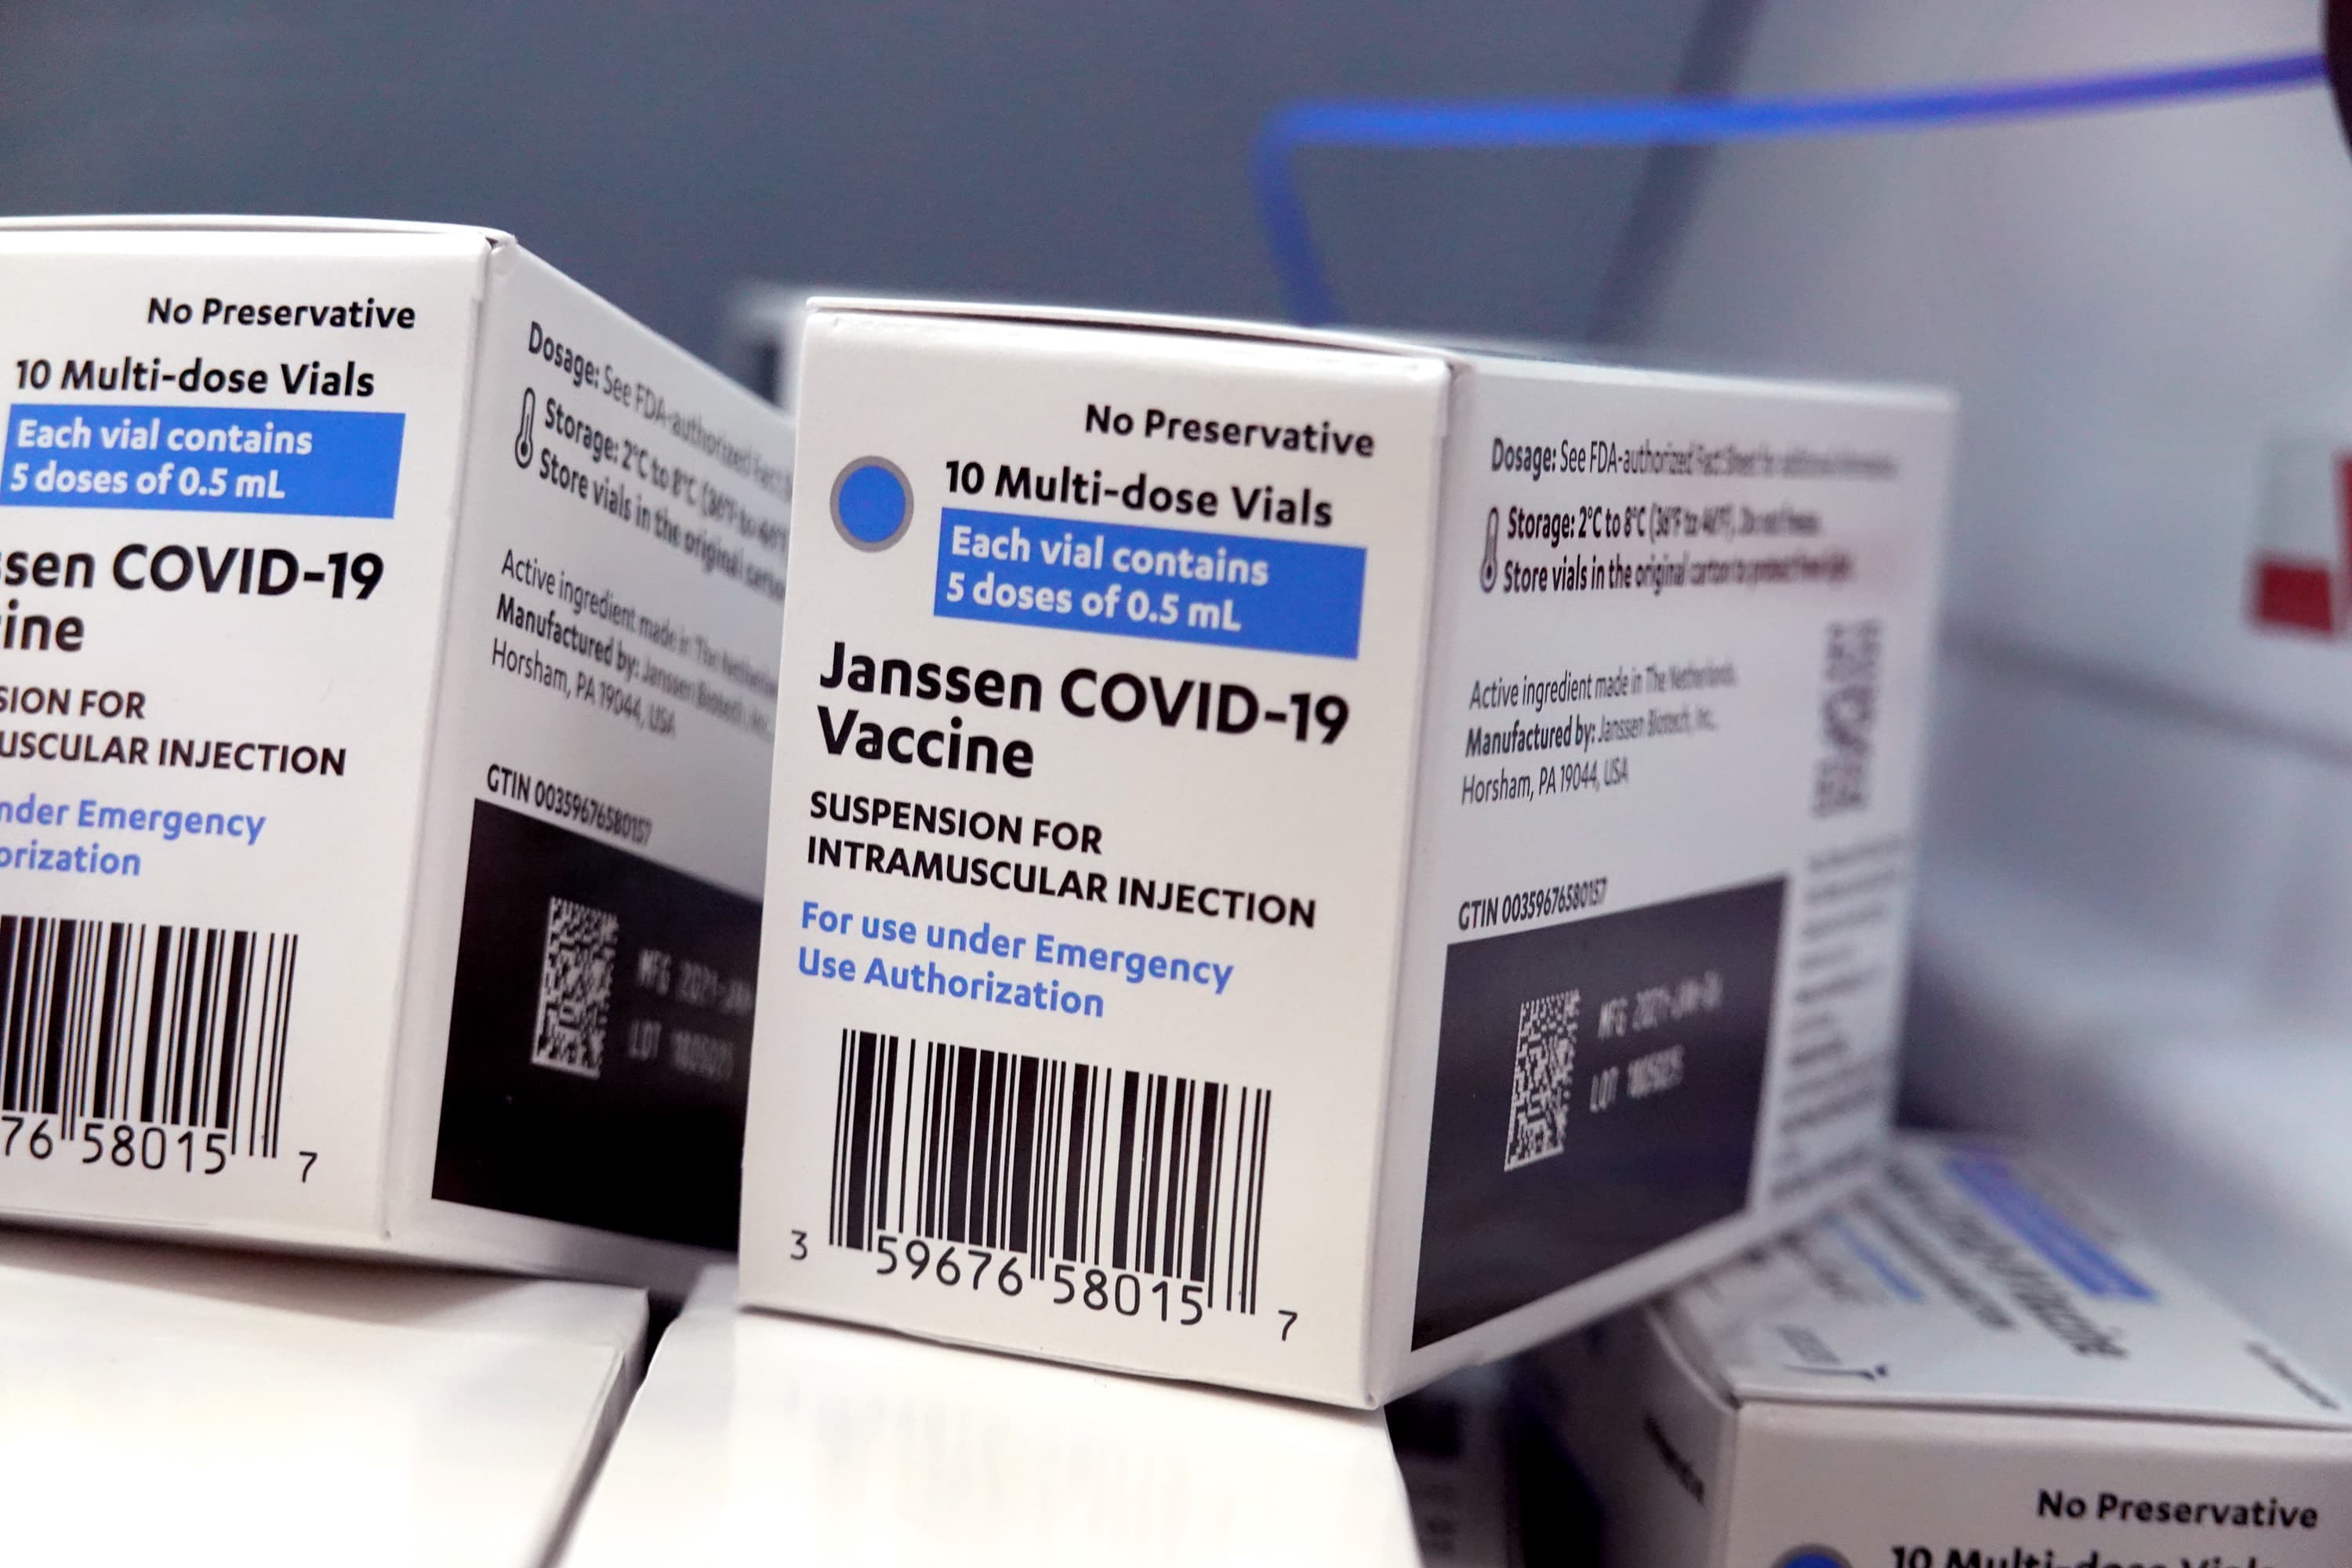 Biden administration plans to buy 100 million extra doses of J&J's Covid vaccine